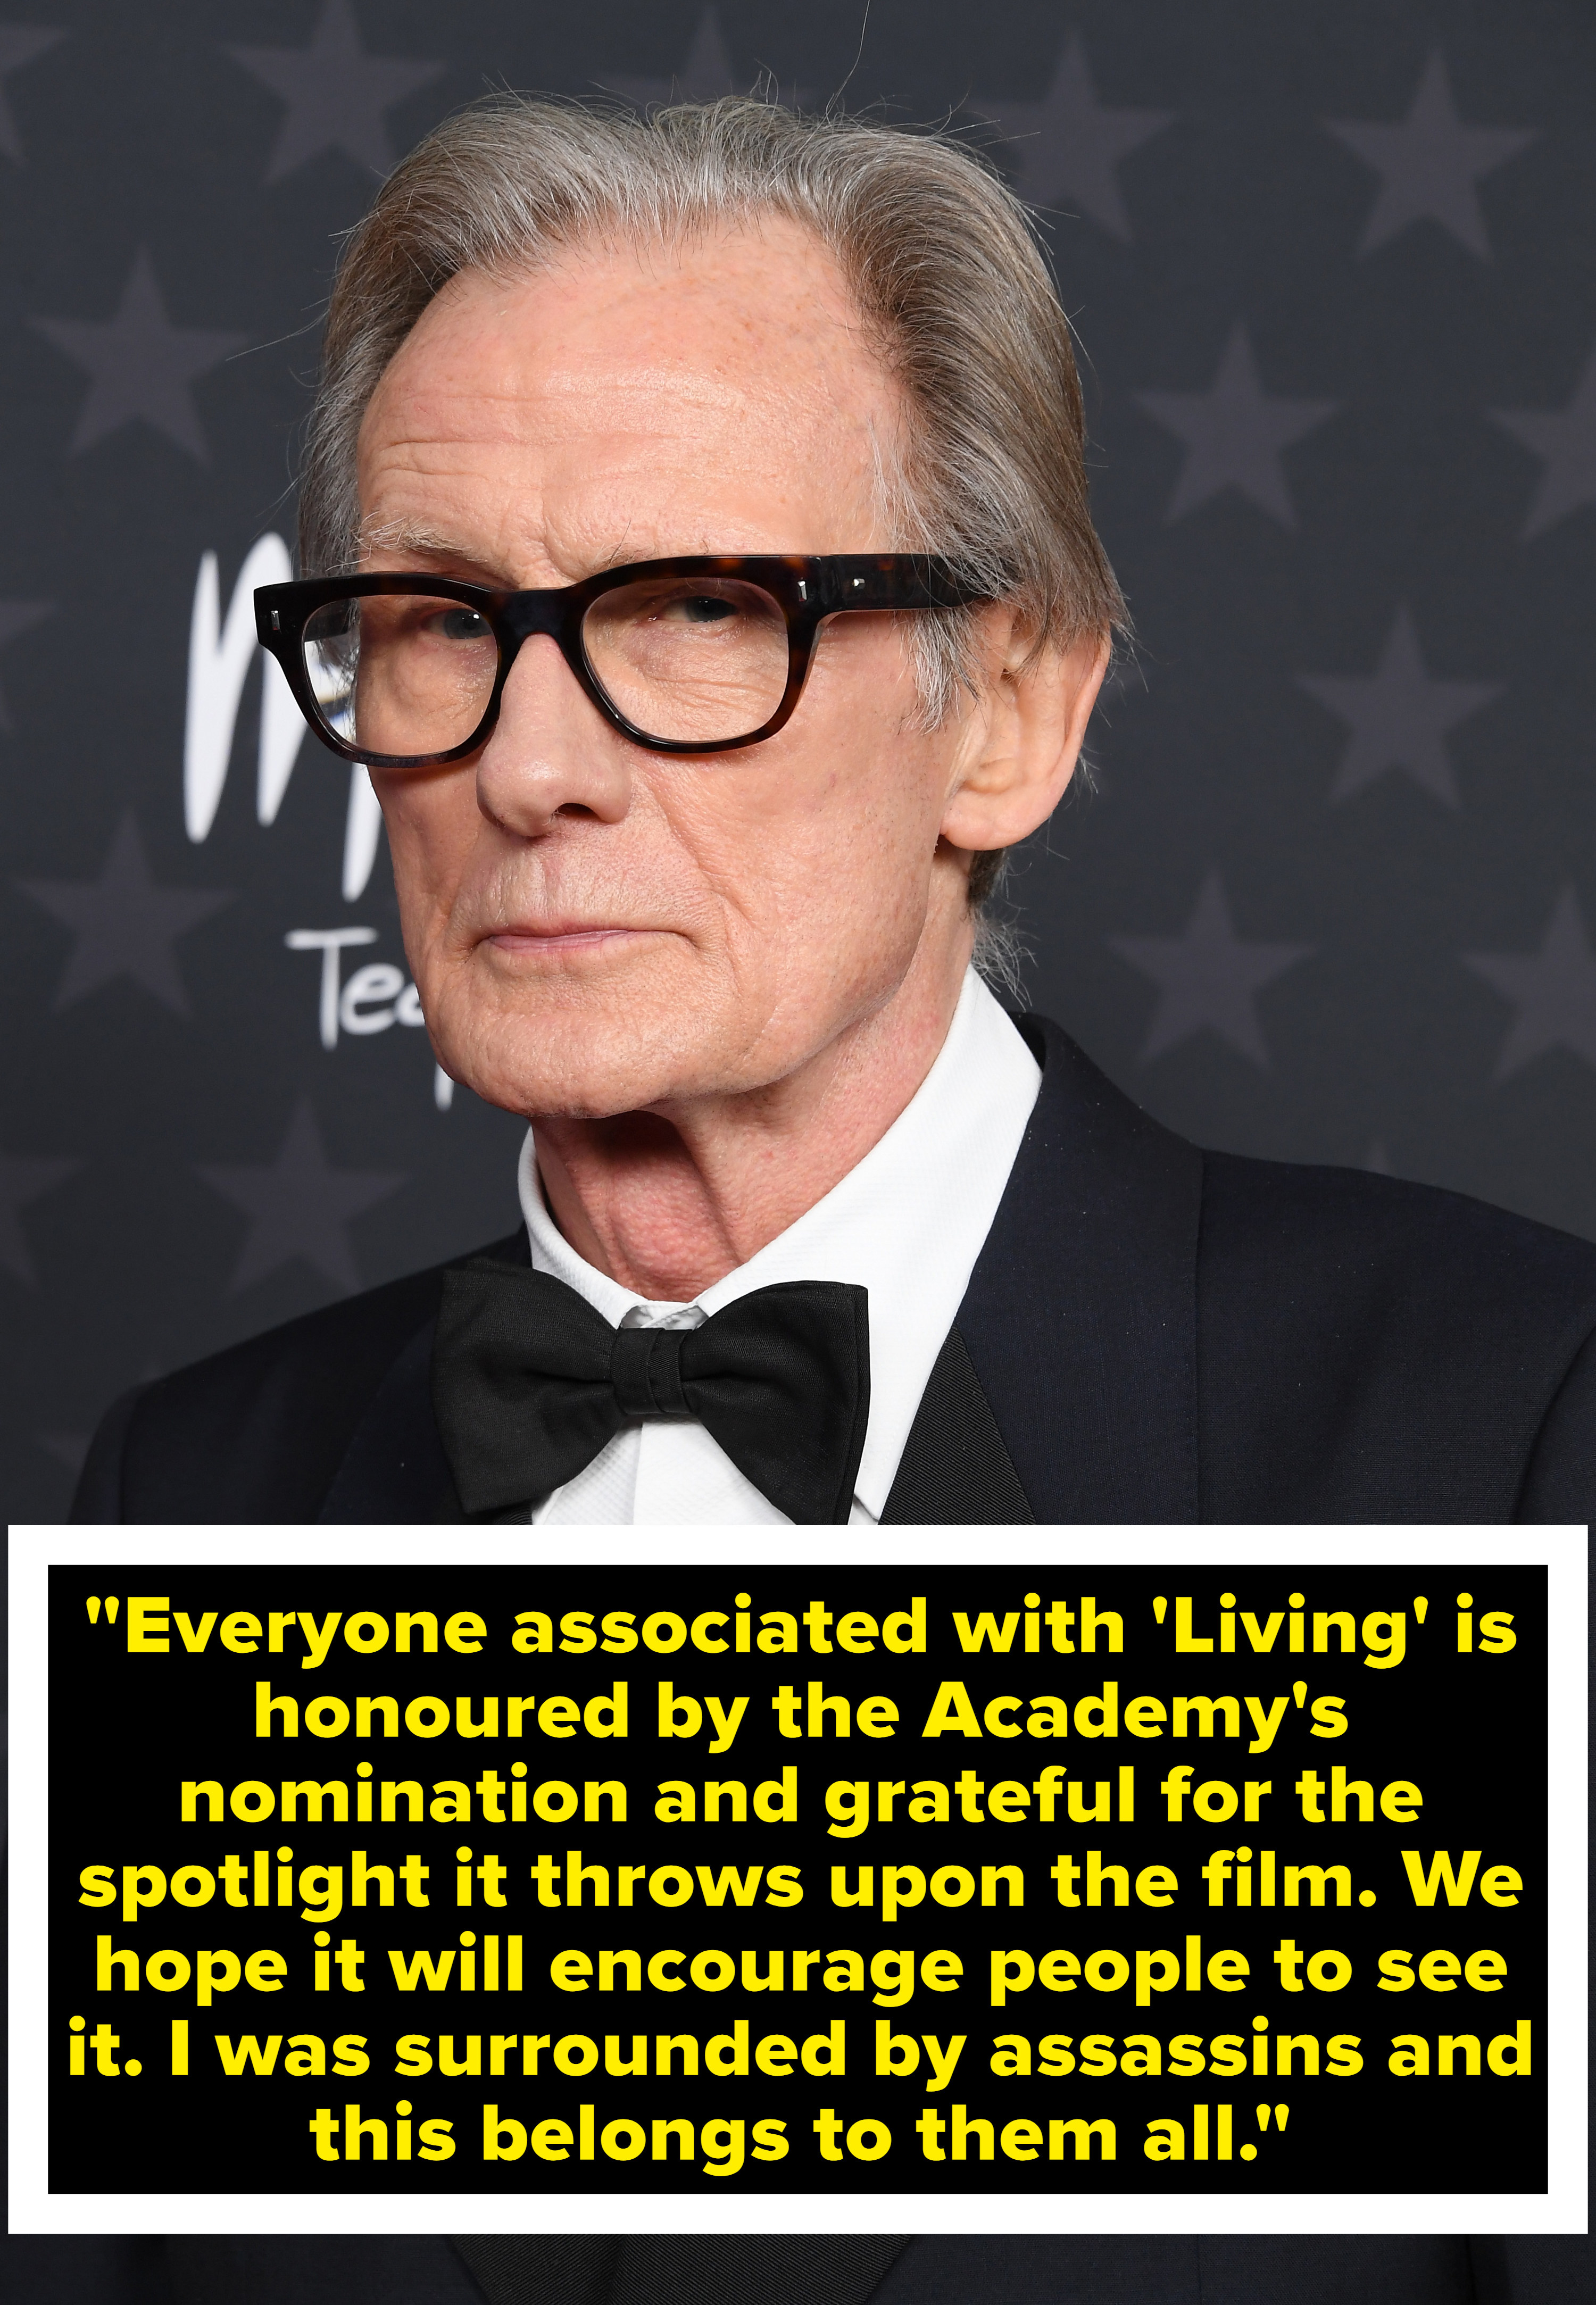 Everyone associated with &#x27;Living&#x27; is honored by the Academy&#x27;s nomination and grateful for the spotlight it throws upon the film. We hope it will encourage people to see it. I was surrounded by assassins and this belongs to them all&quot;